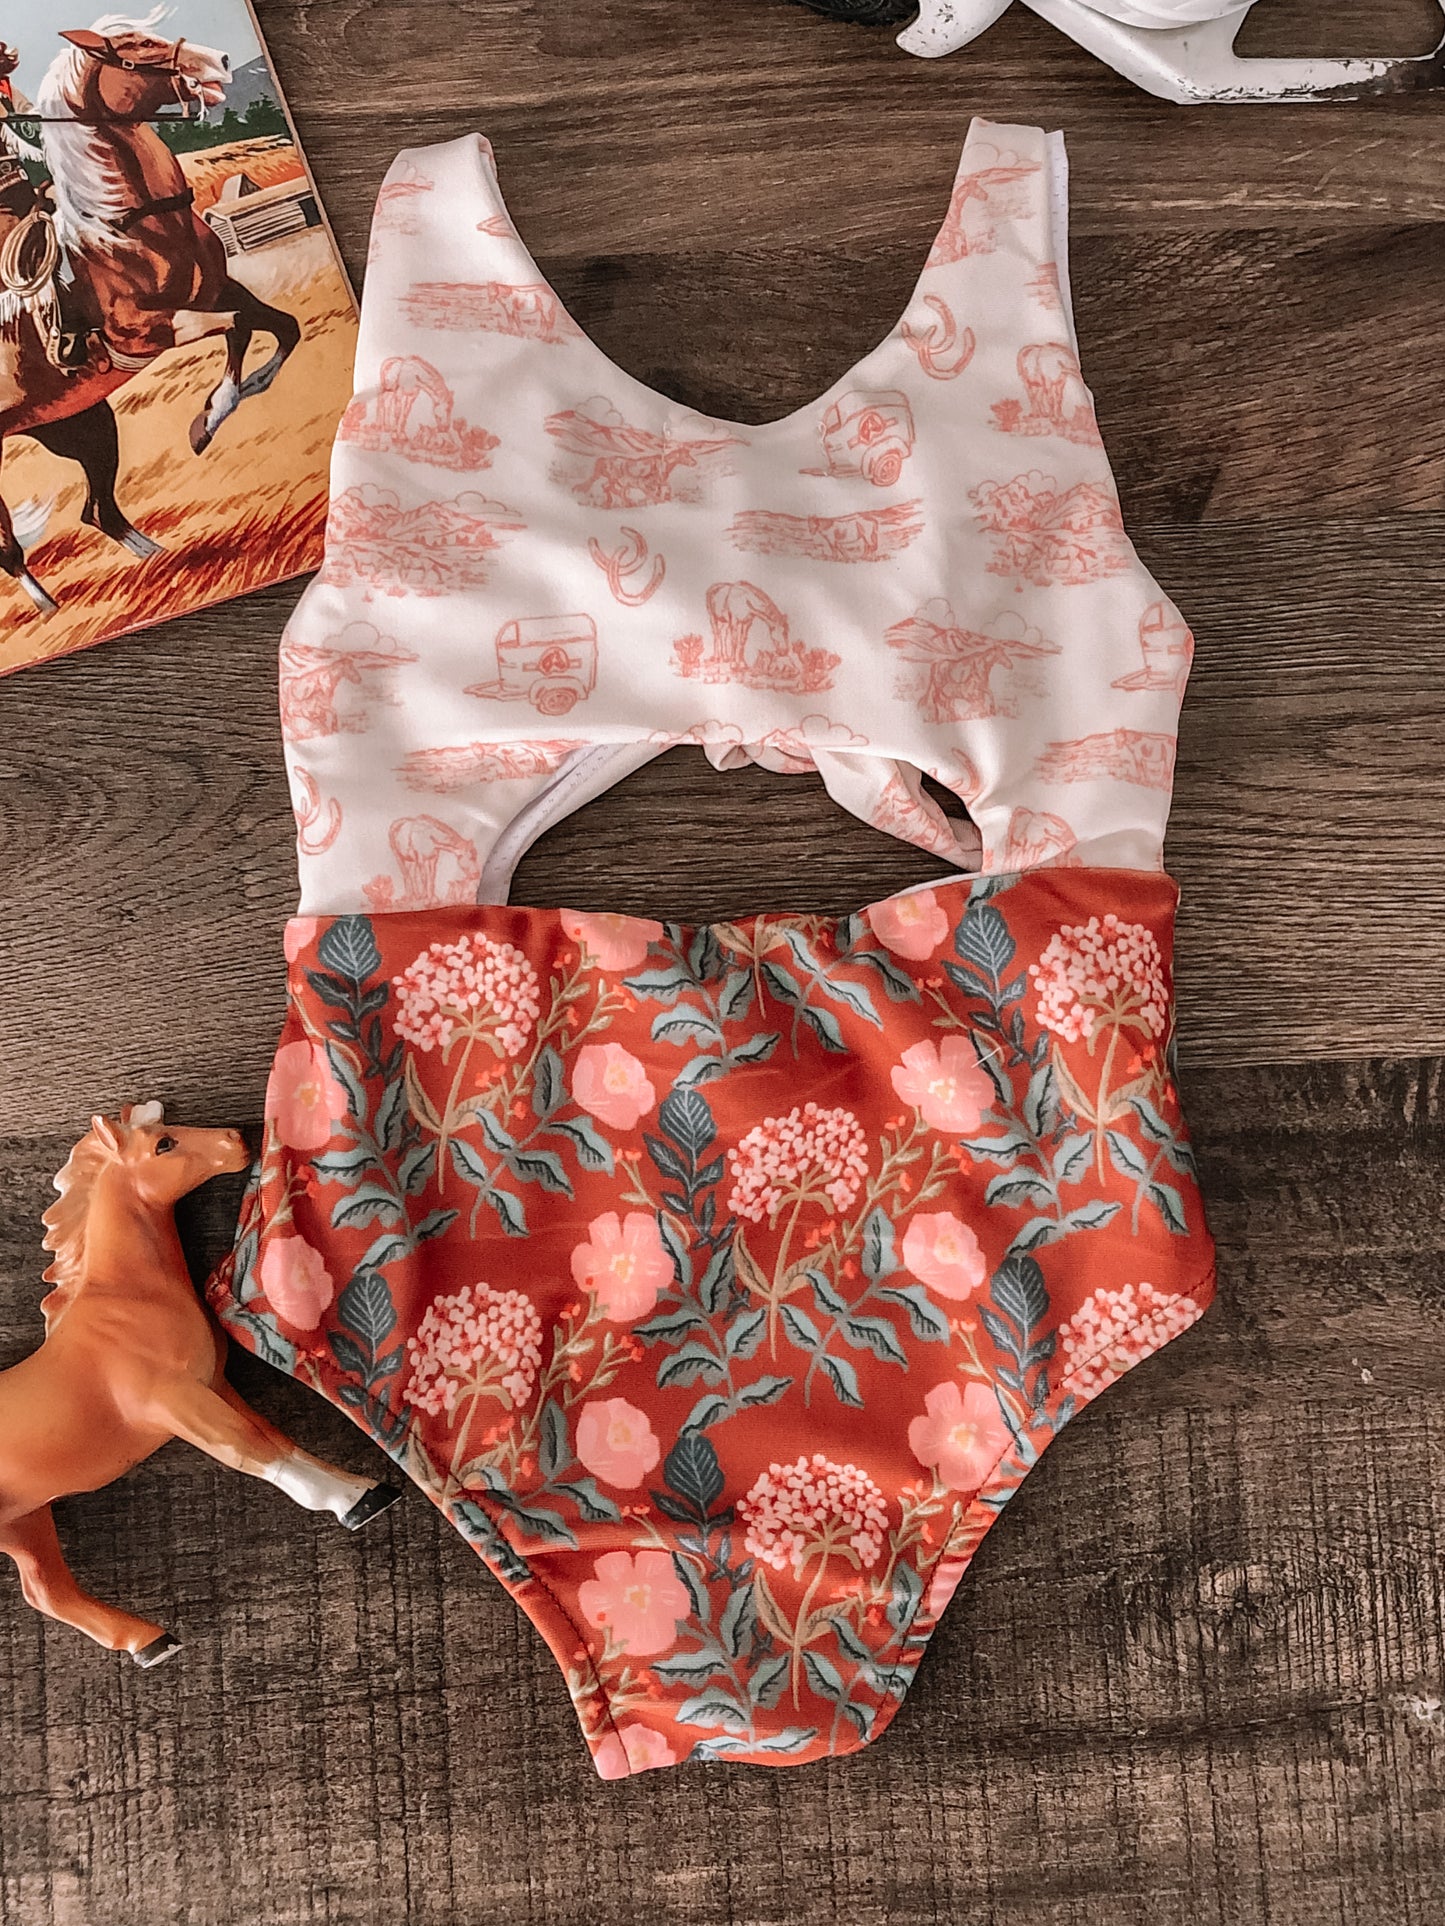 Horses and Floral Cut-Out Swimsuit - Cream & Brown